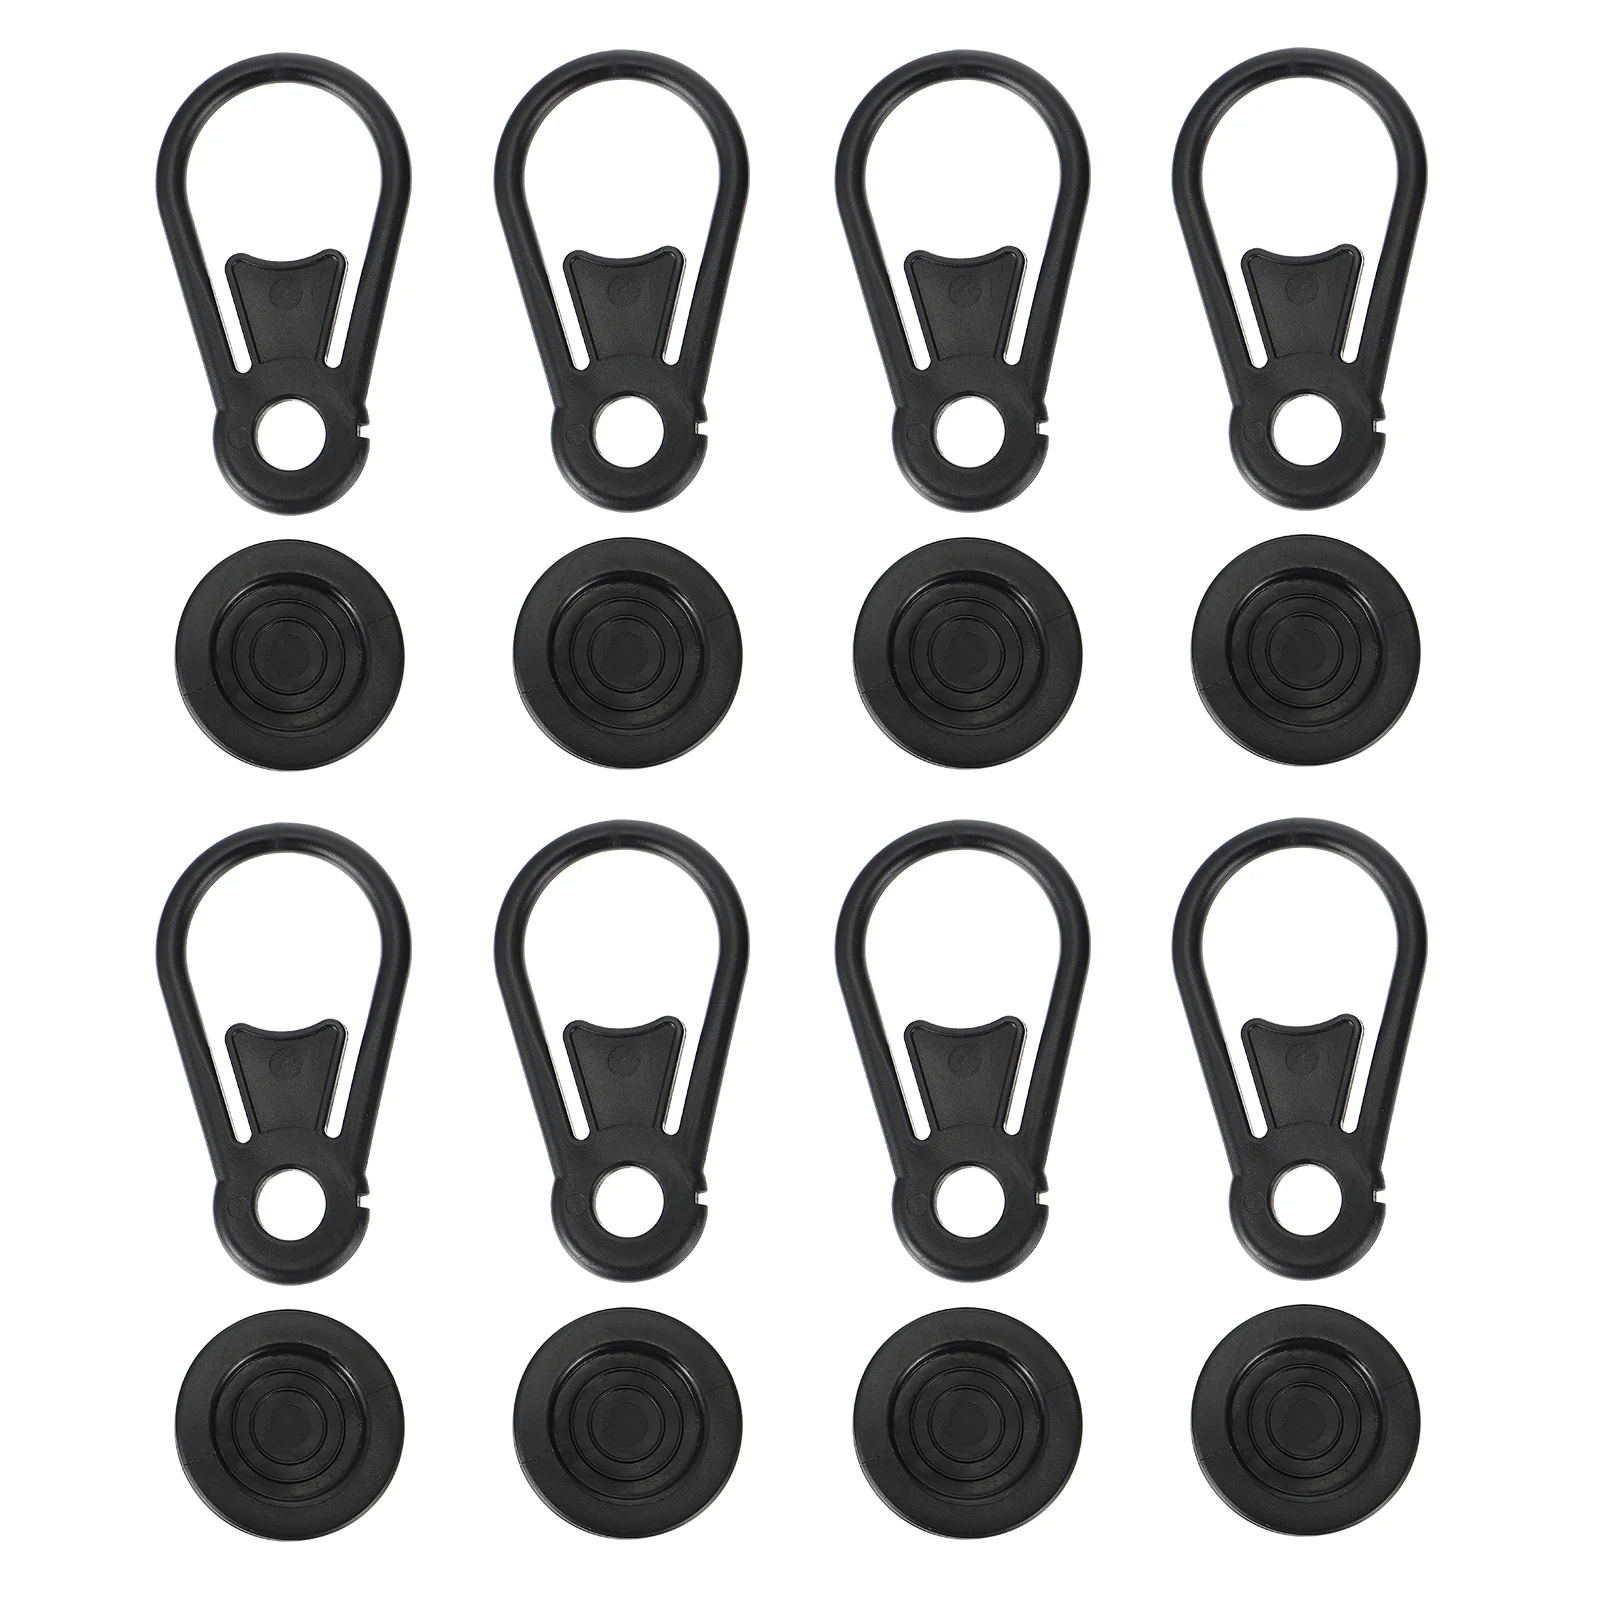 

10 Pcs Shed Clip Tent Awning Clips Water Proof Tarp Grabbers Sun Shade Trap Clamps Fixing